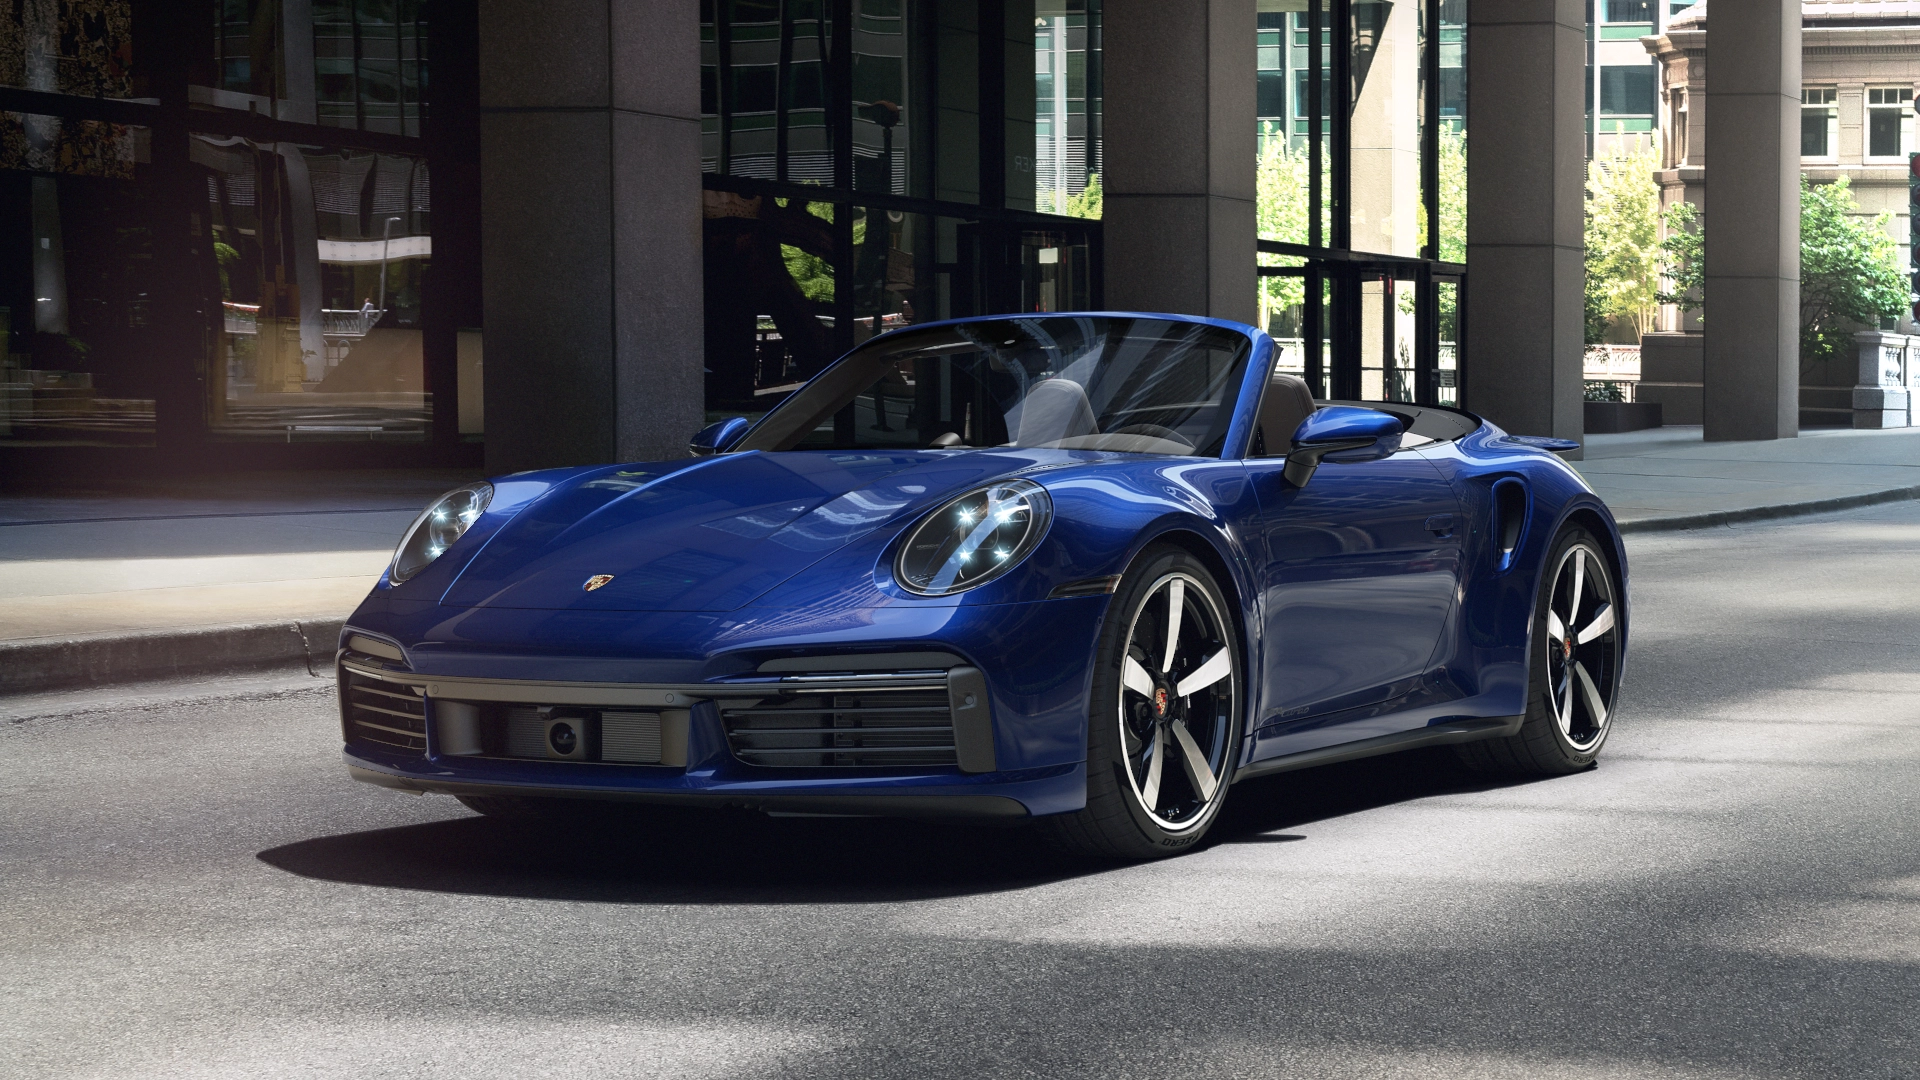 911 Turbo Cabriolet front view